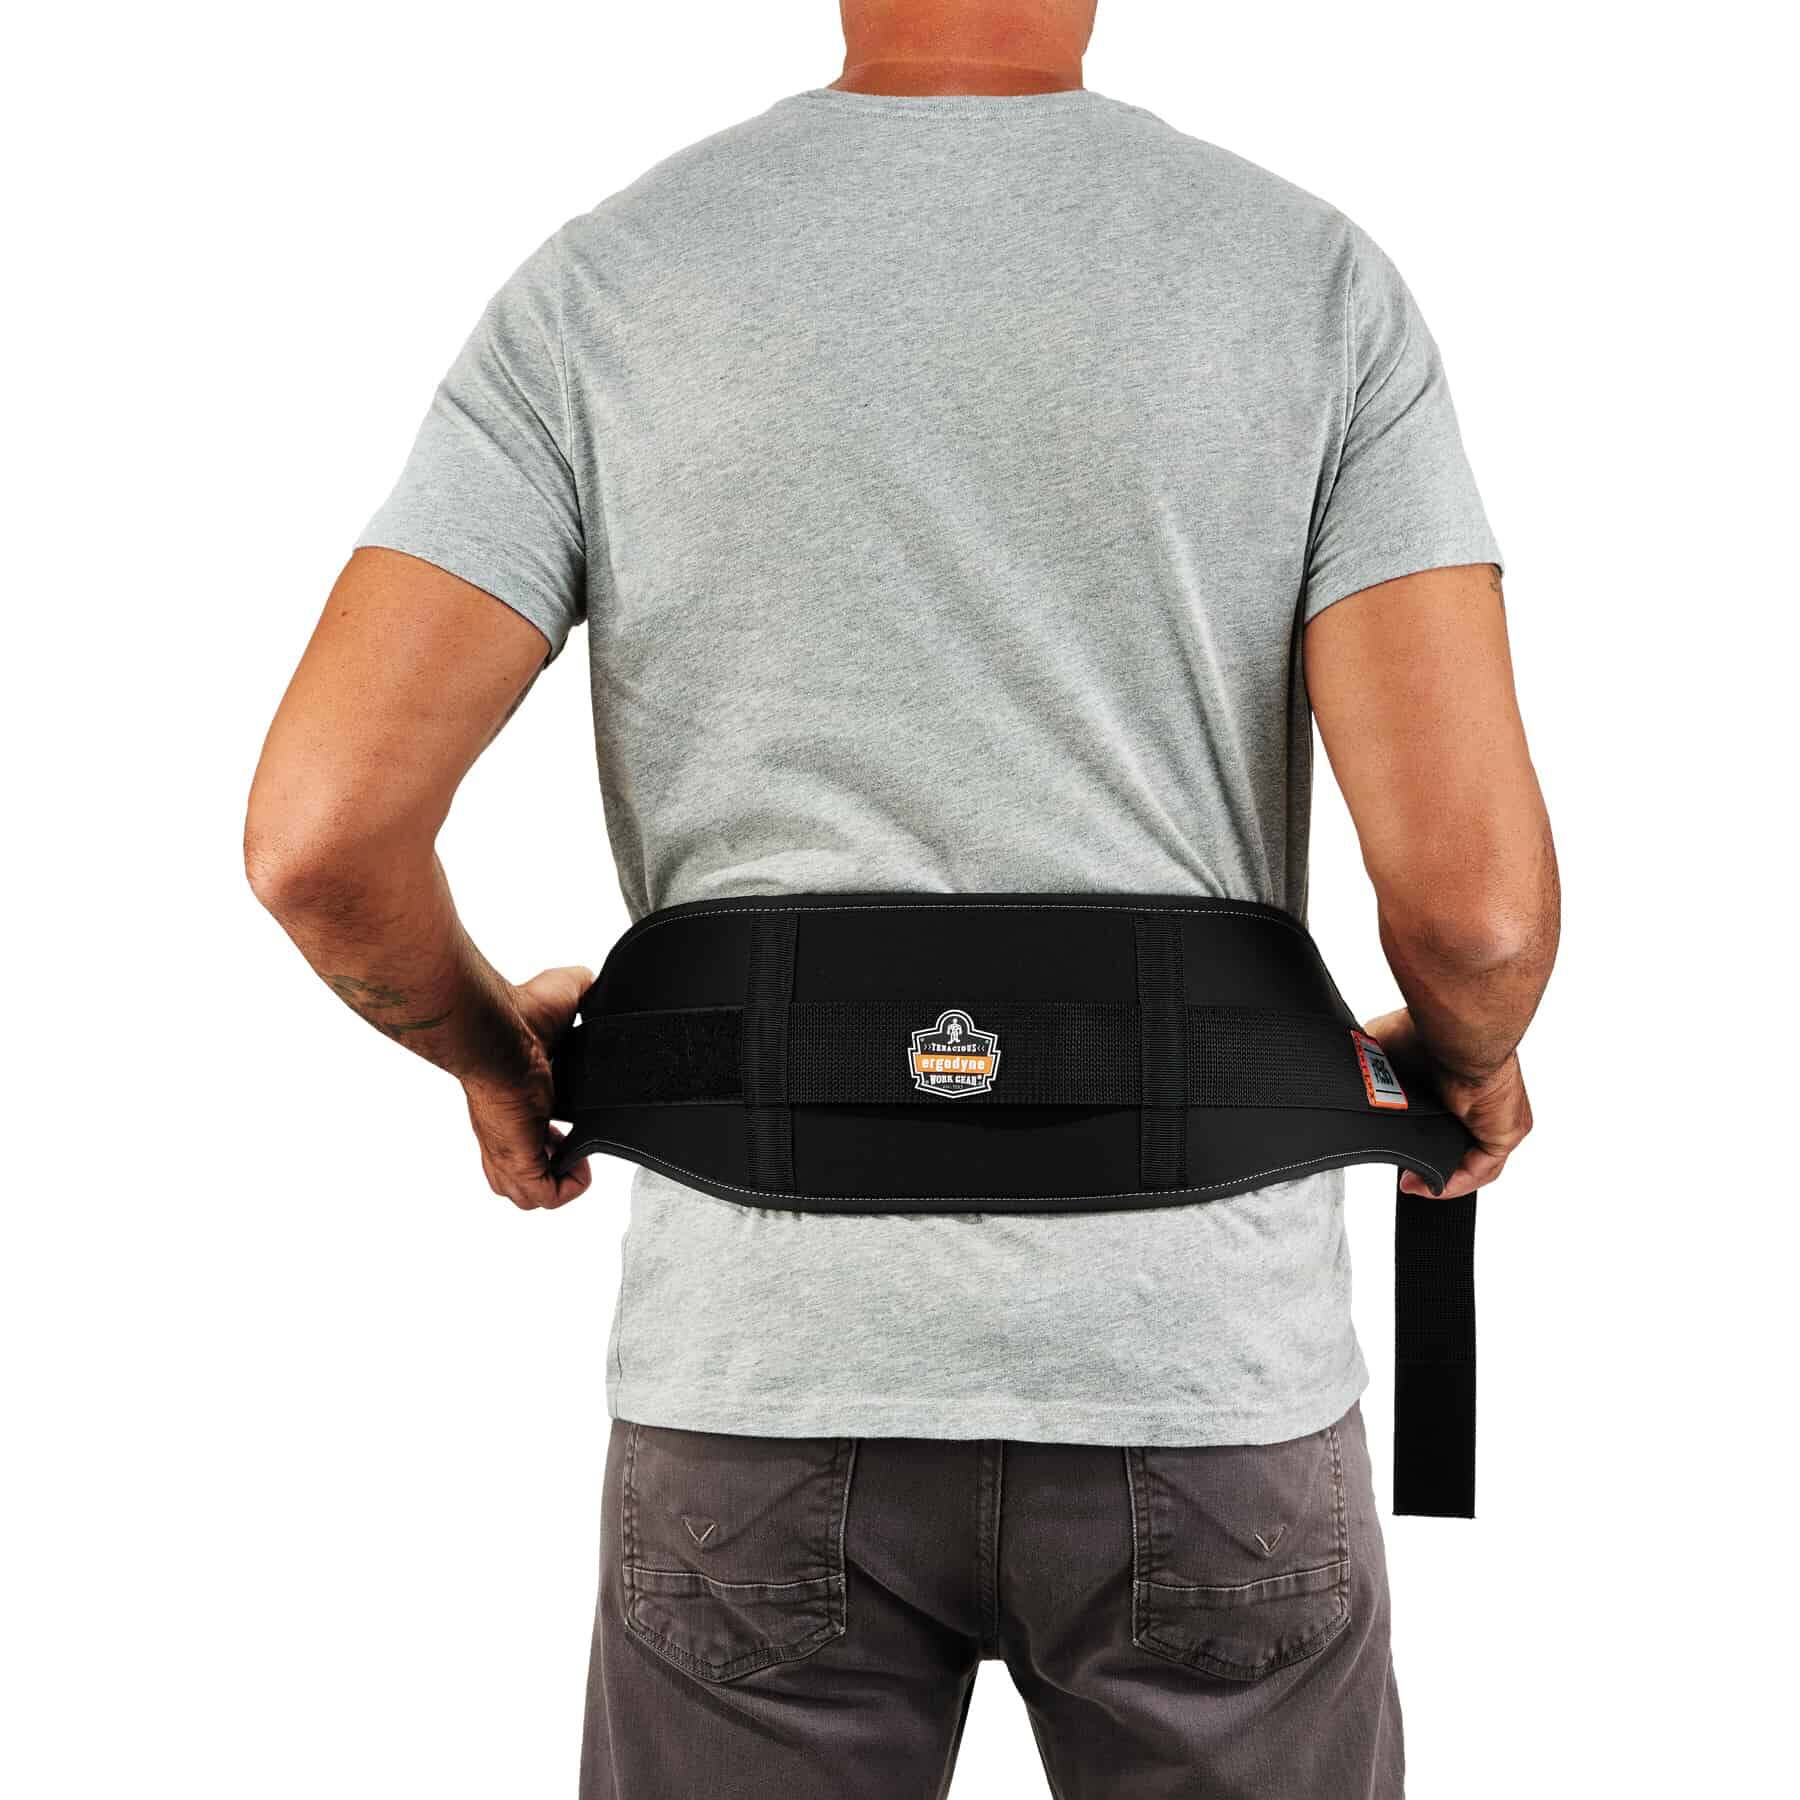 Weight Lifting Back Support, Low Profile, Back Brace